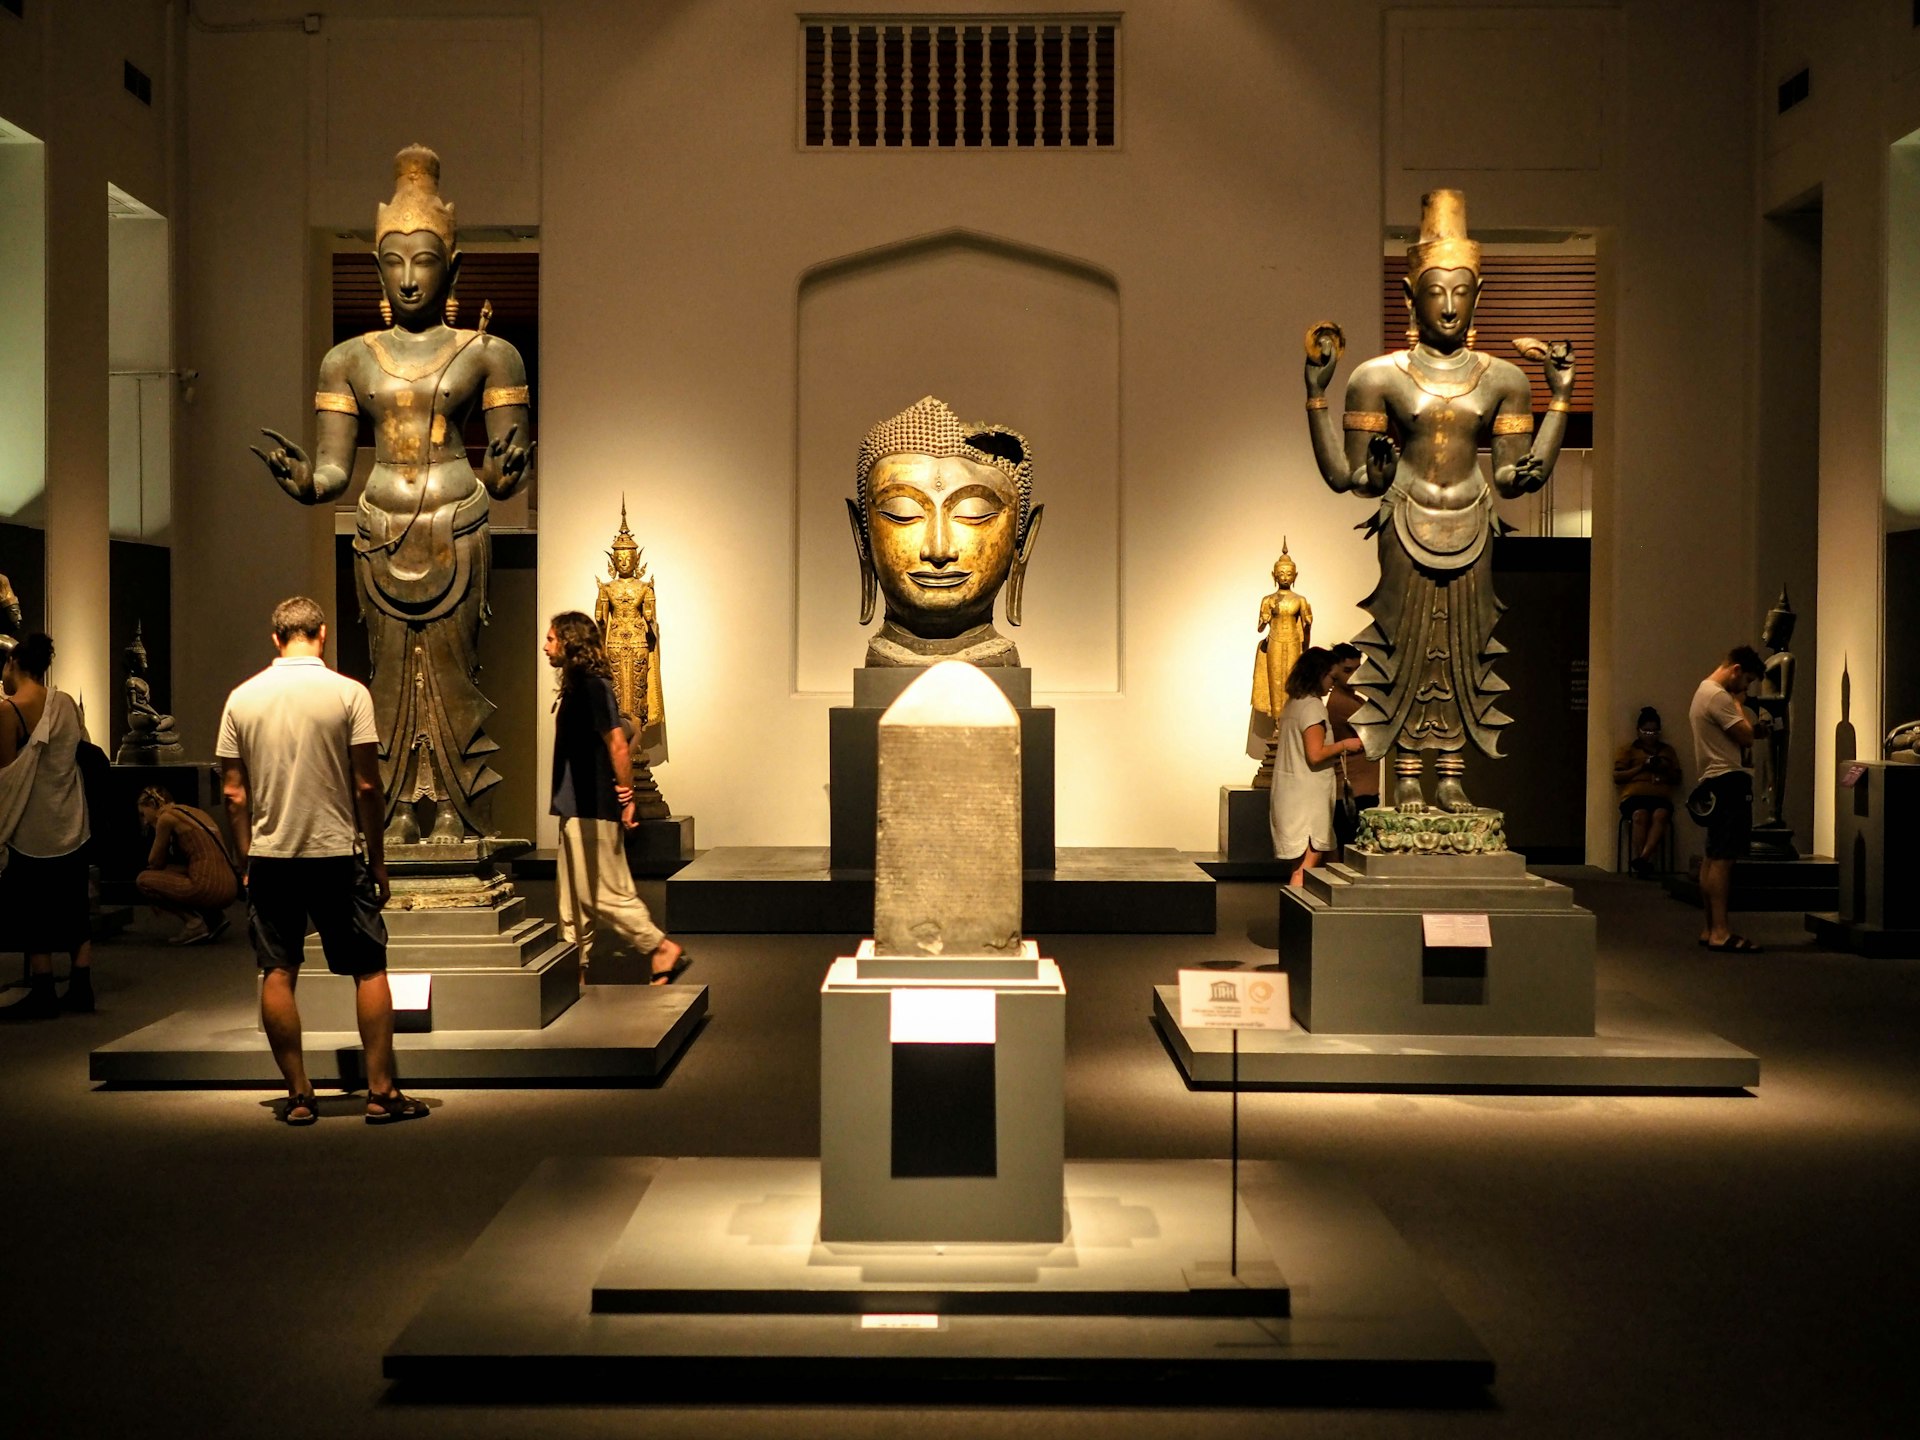 Tourists look at Thai art and artefacts which are lit up by lights in the National Museum in Bangkok, including giant sculptures of heads